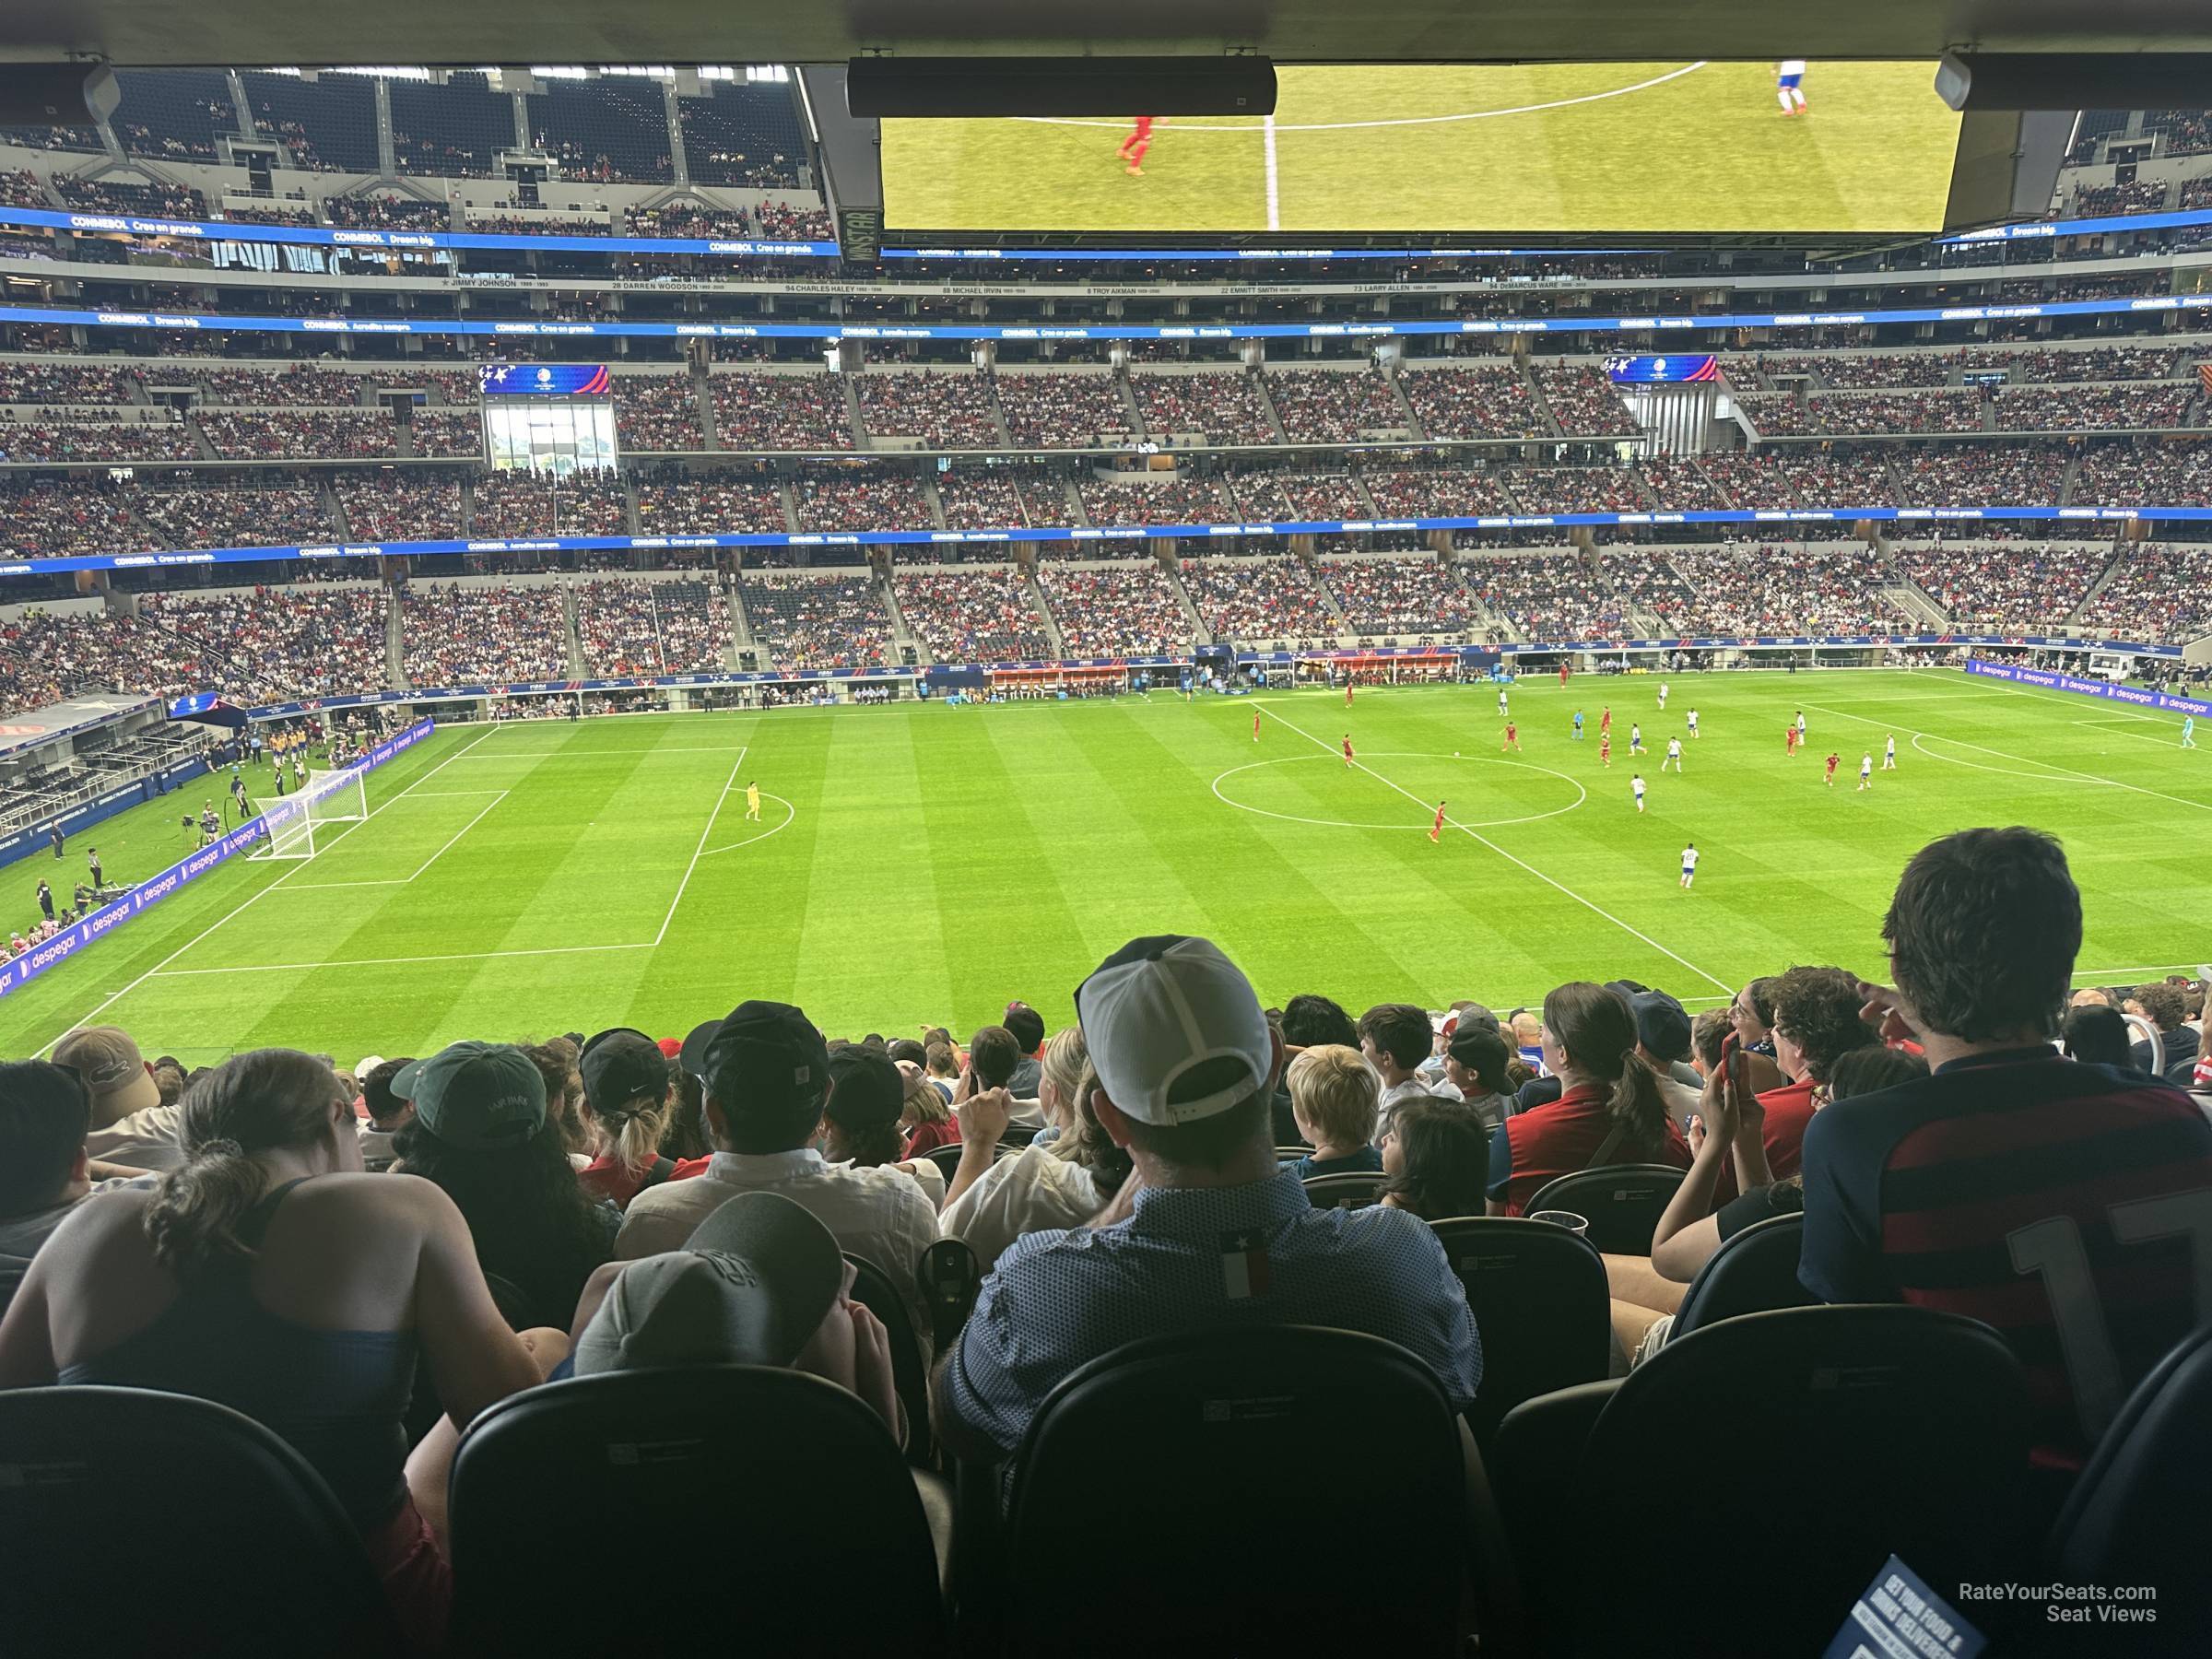 section c212, row 15 seat view  for soccer - at&t stadium (cowboys stadium)